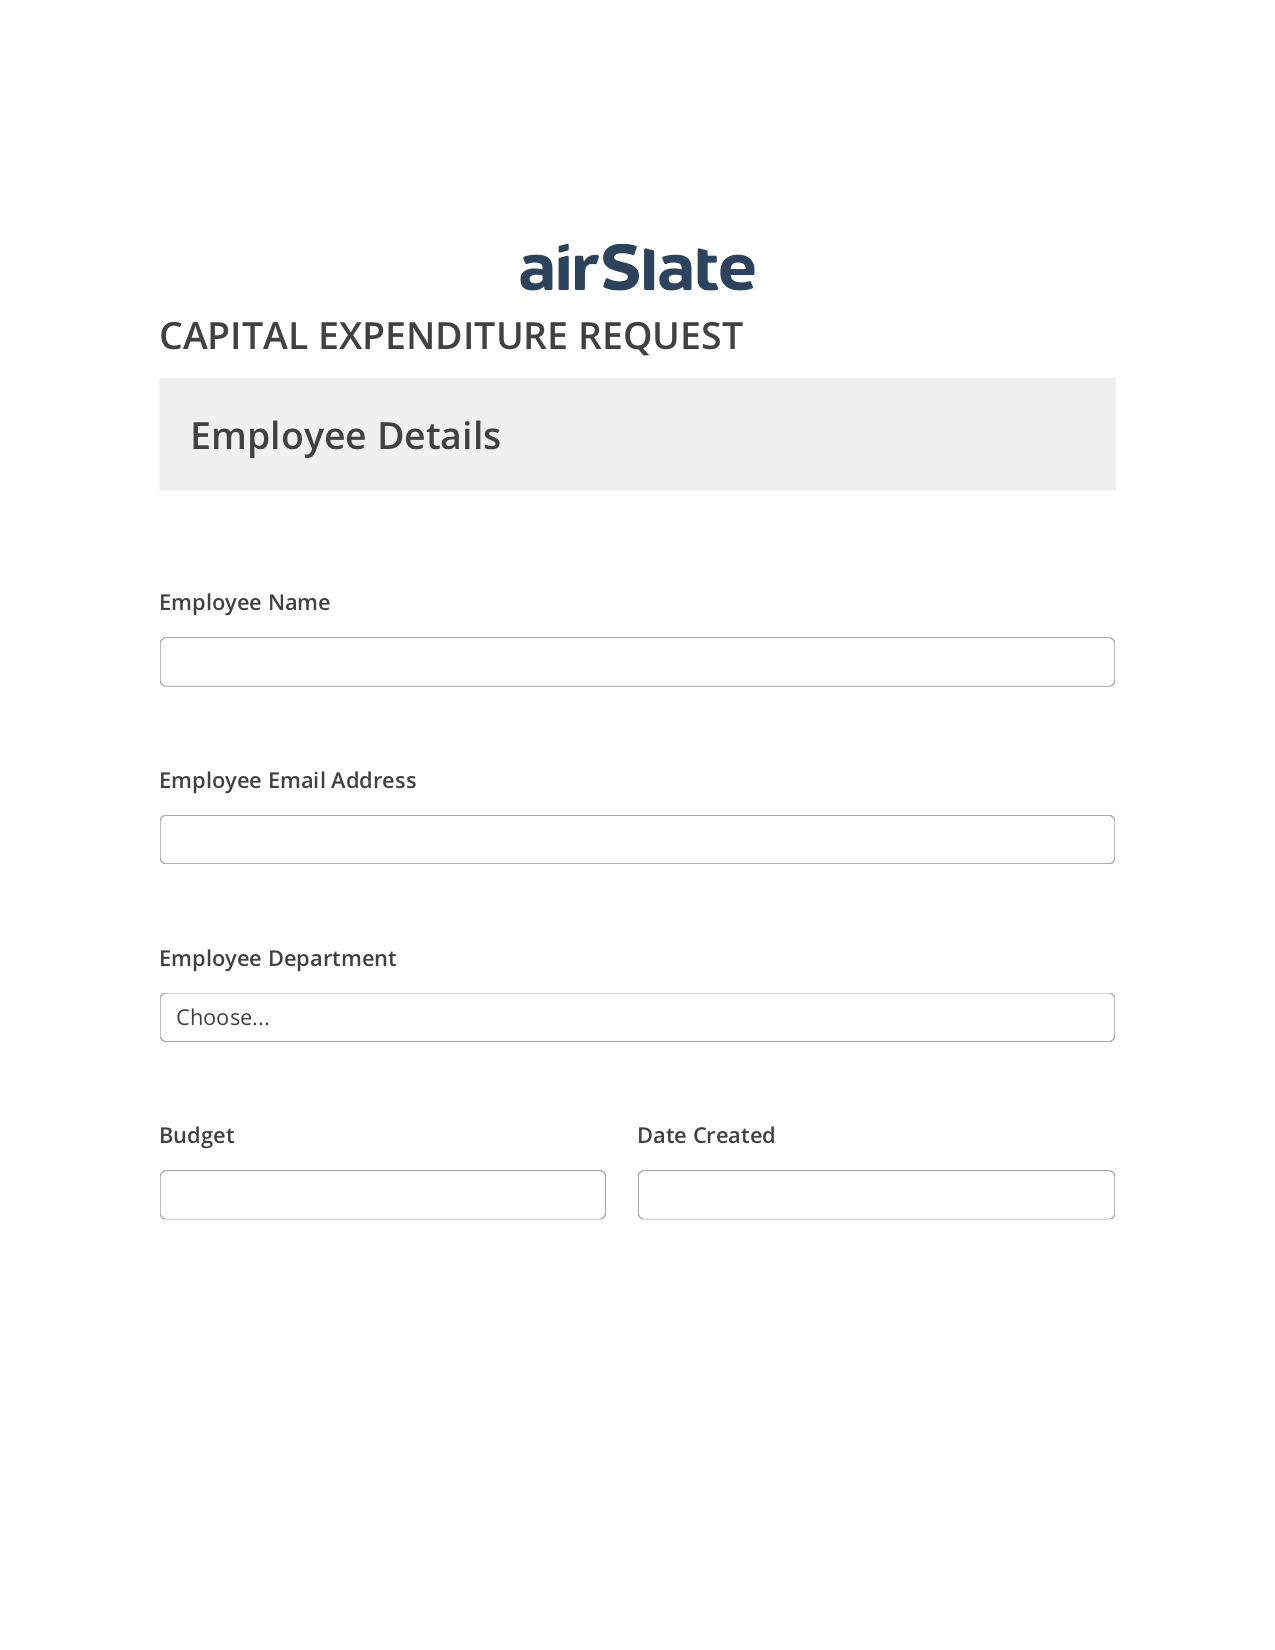 Capital Expenditure Request Approval Workflow Pre-fill Document Bot, Create Salesforce Record Bot, Export to Smartsheet